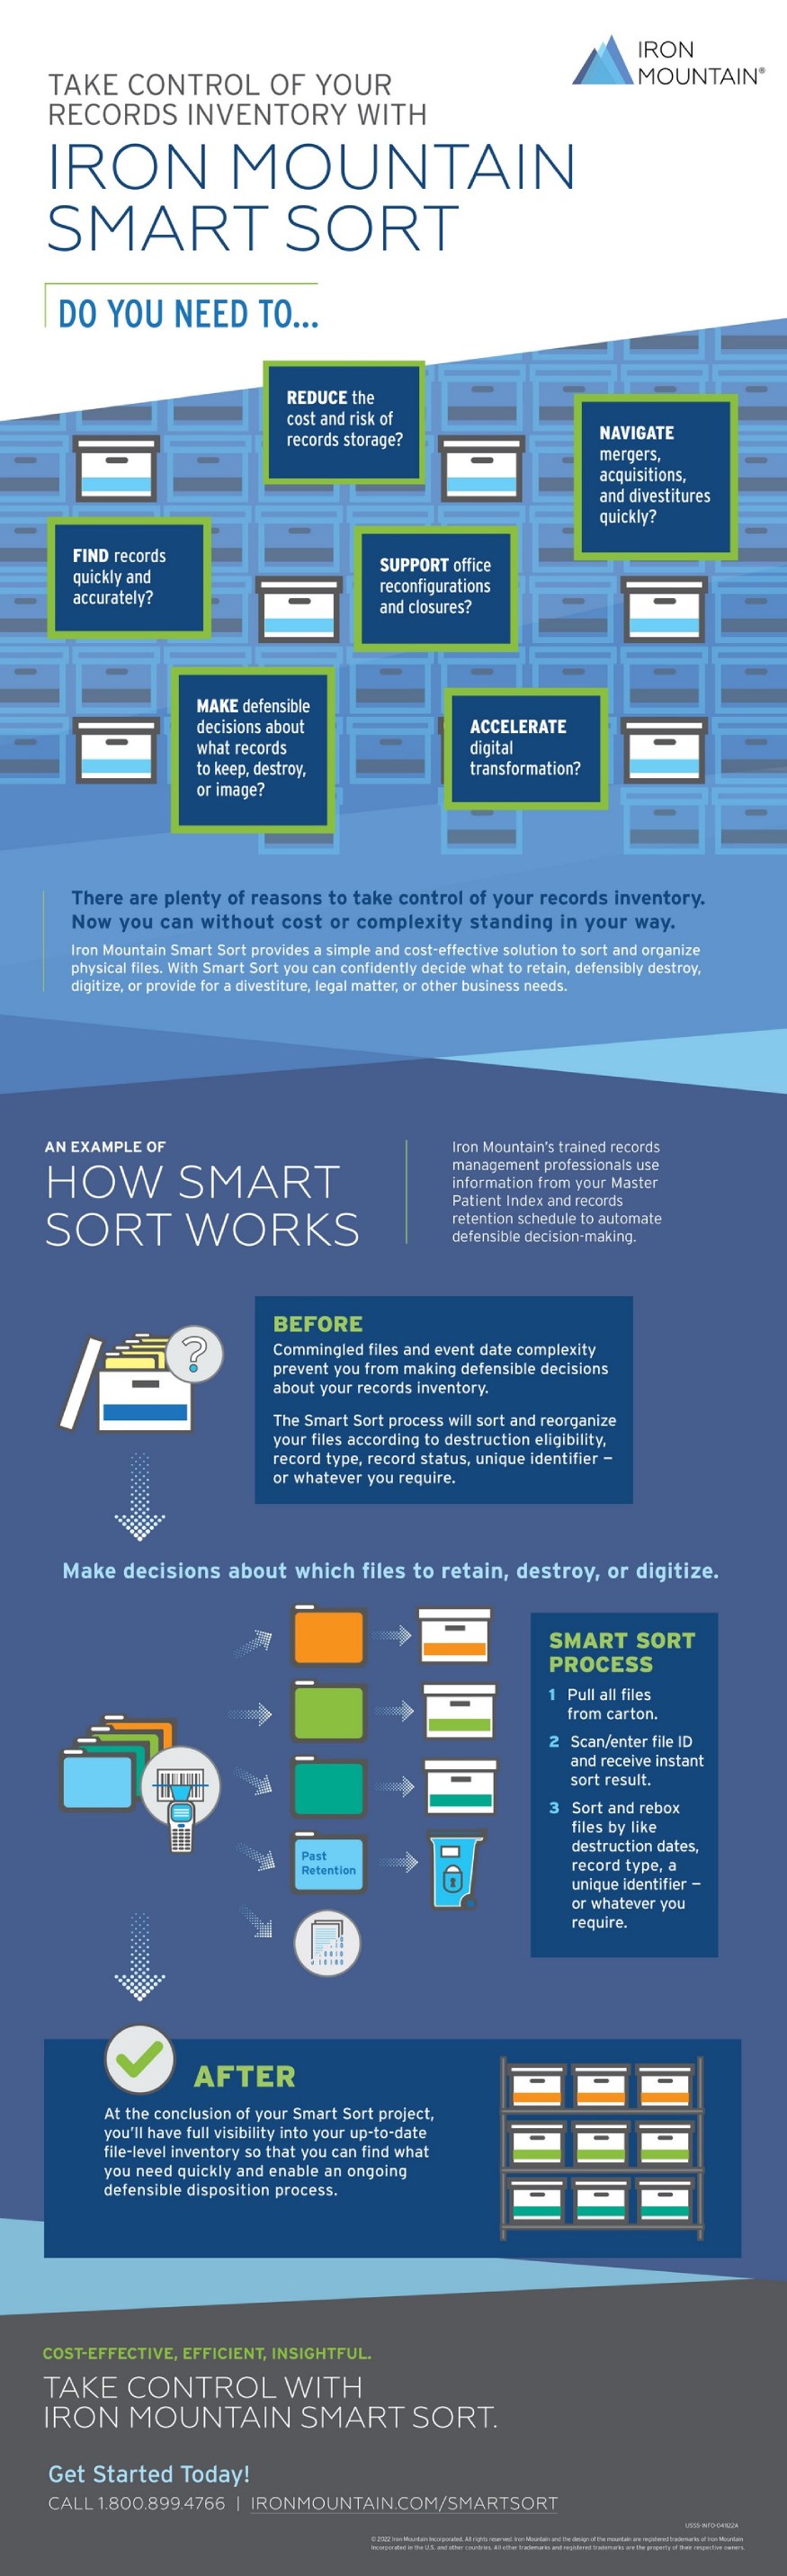 Iron Mountain Smart Sort For Healthcare - Infographic